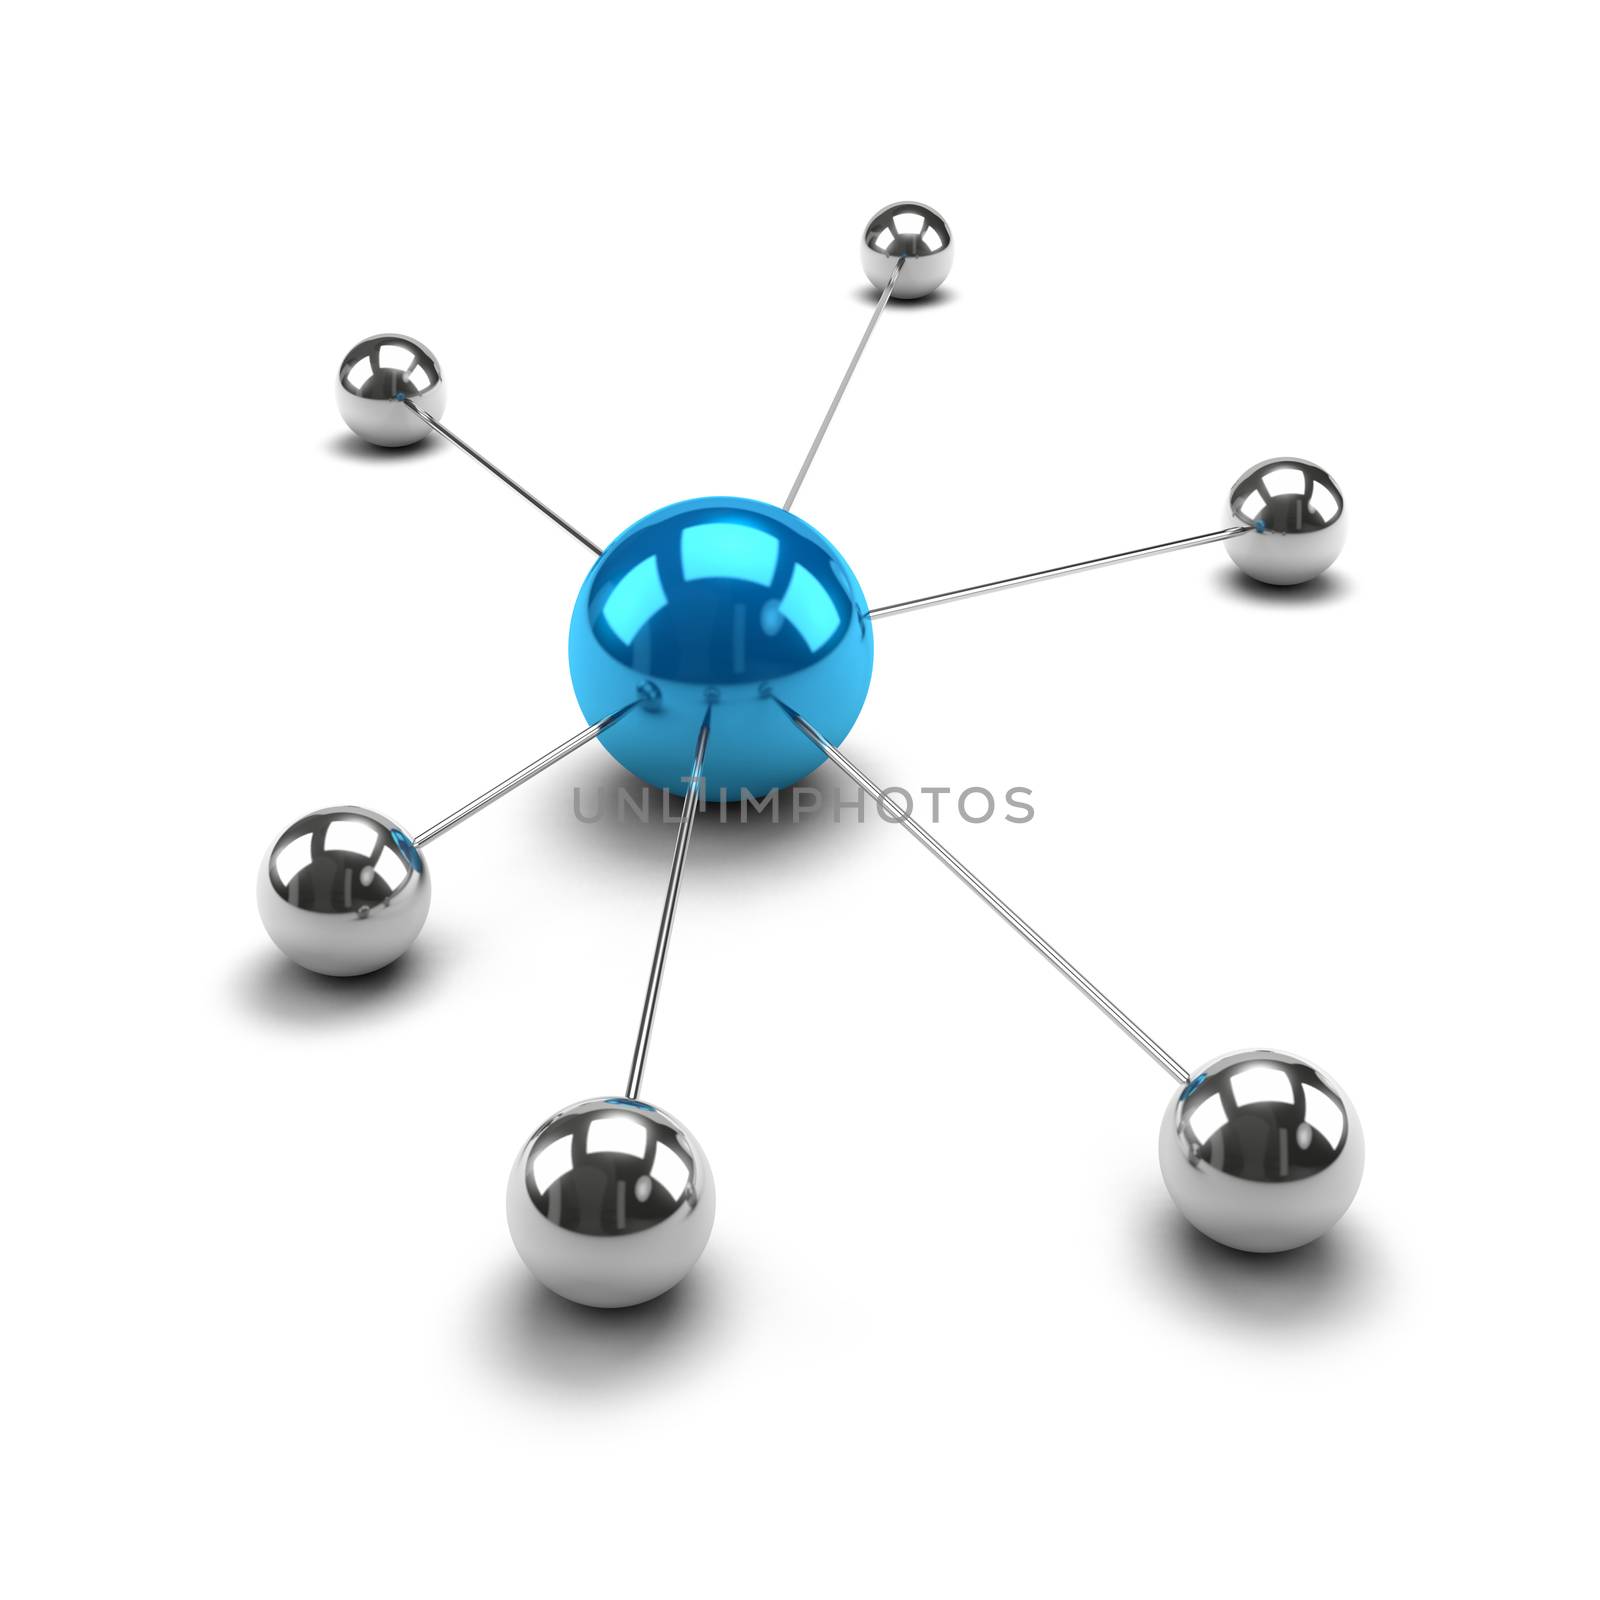 Metallic Spheres Linked Together 3D Illustration, Connections Concept